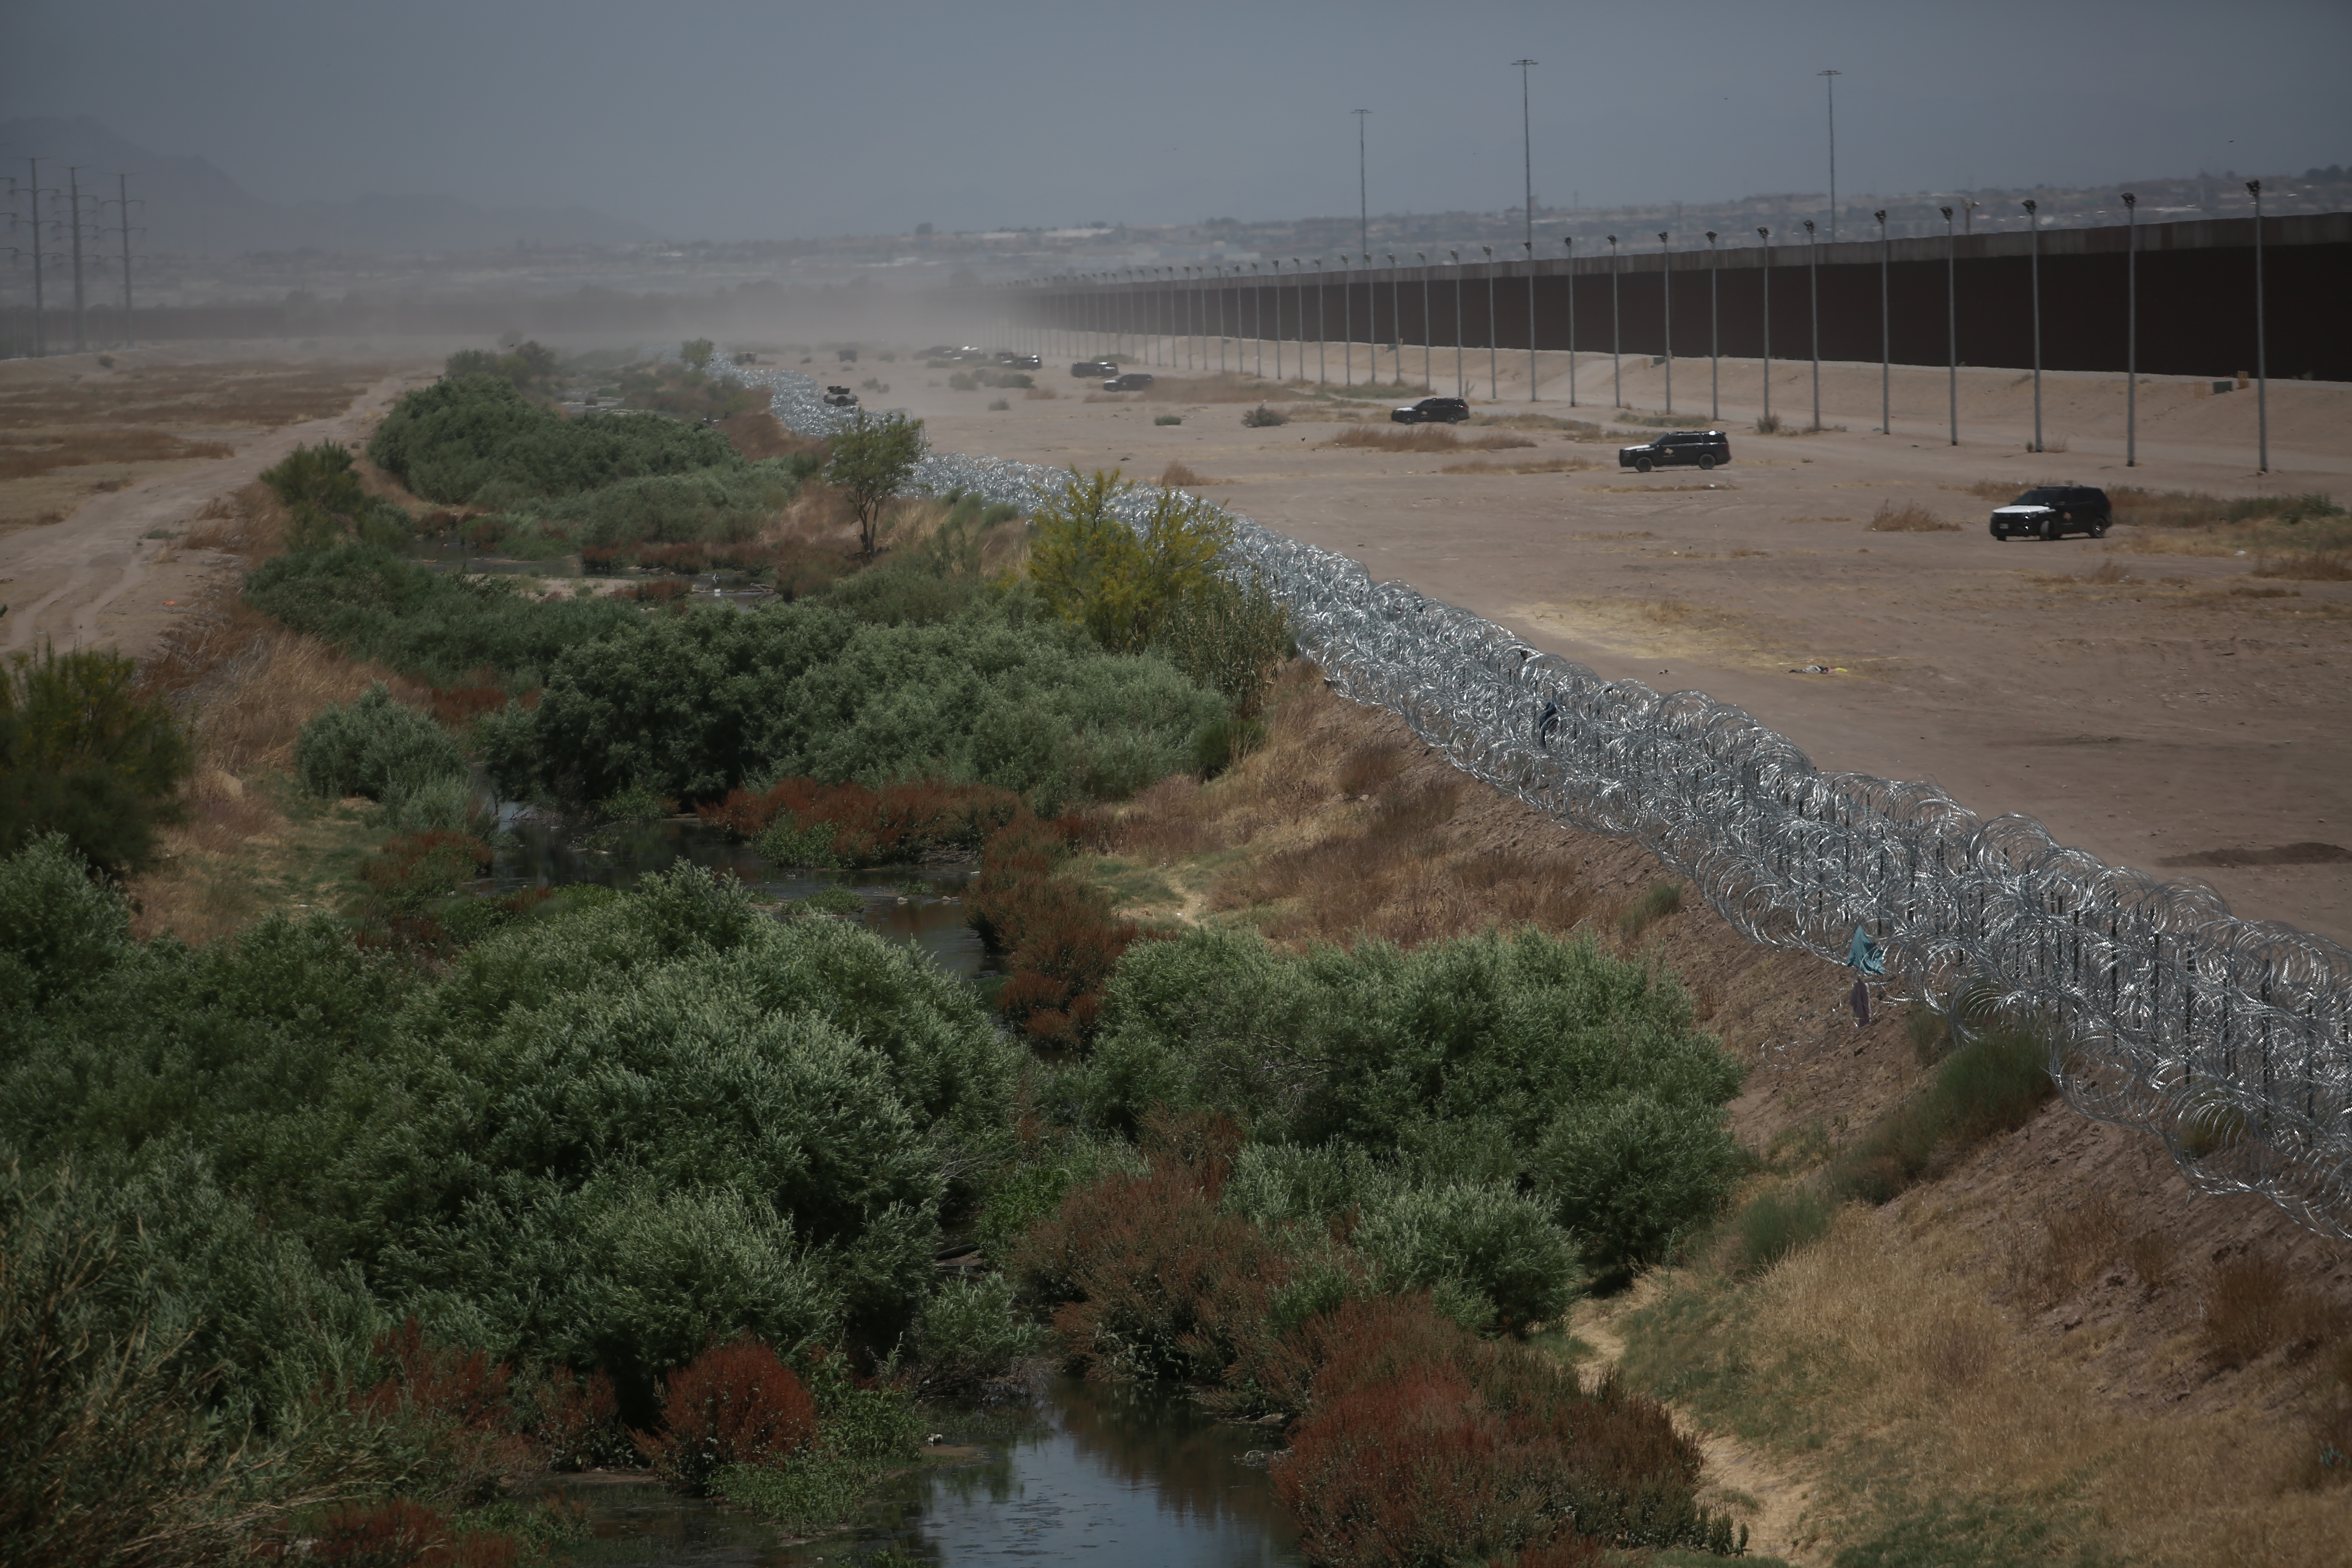 US-Mexico border comprised of green, desert shrubs and pond water, a metal fence, and sand. SUVs patrol the border, parked in front of a tall cement wall lined with floodlights